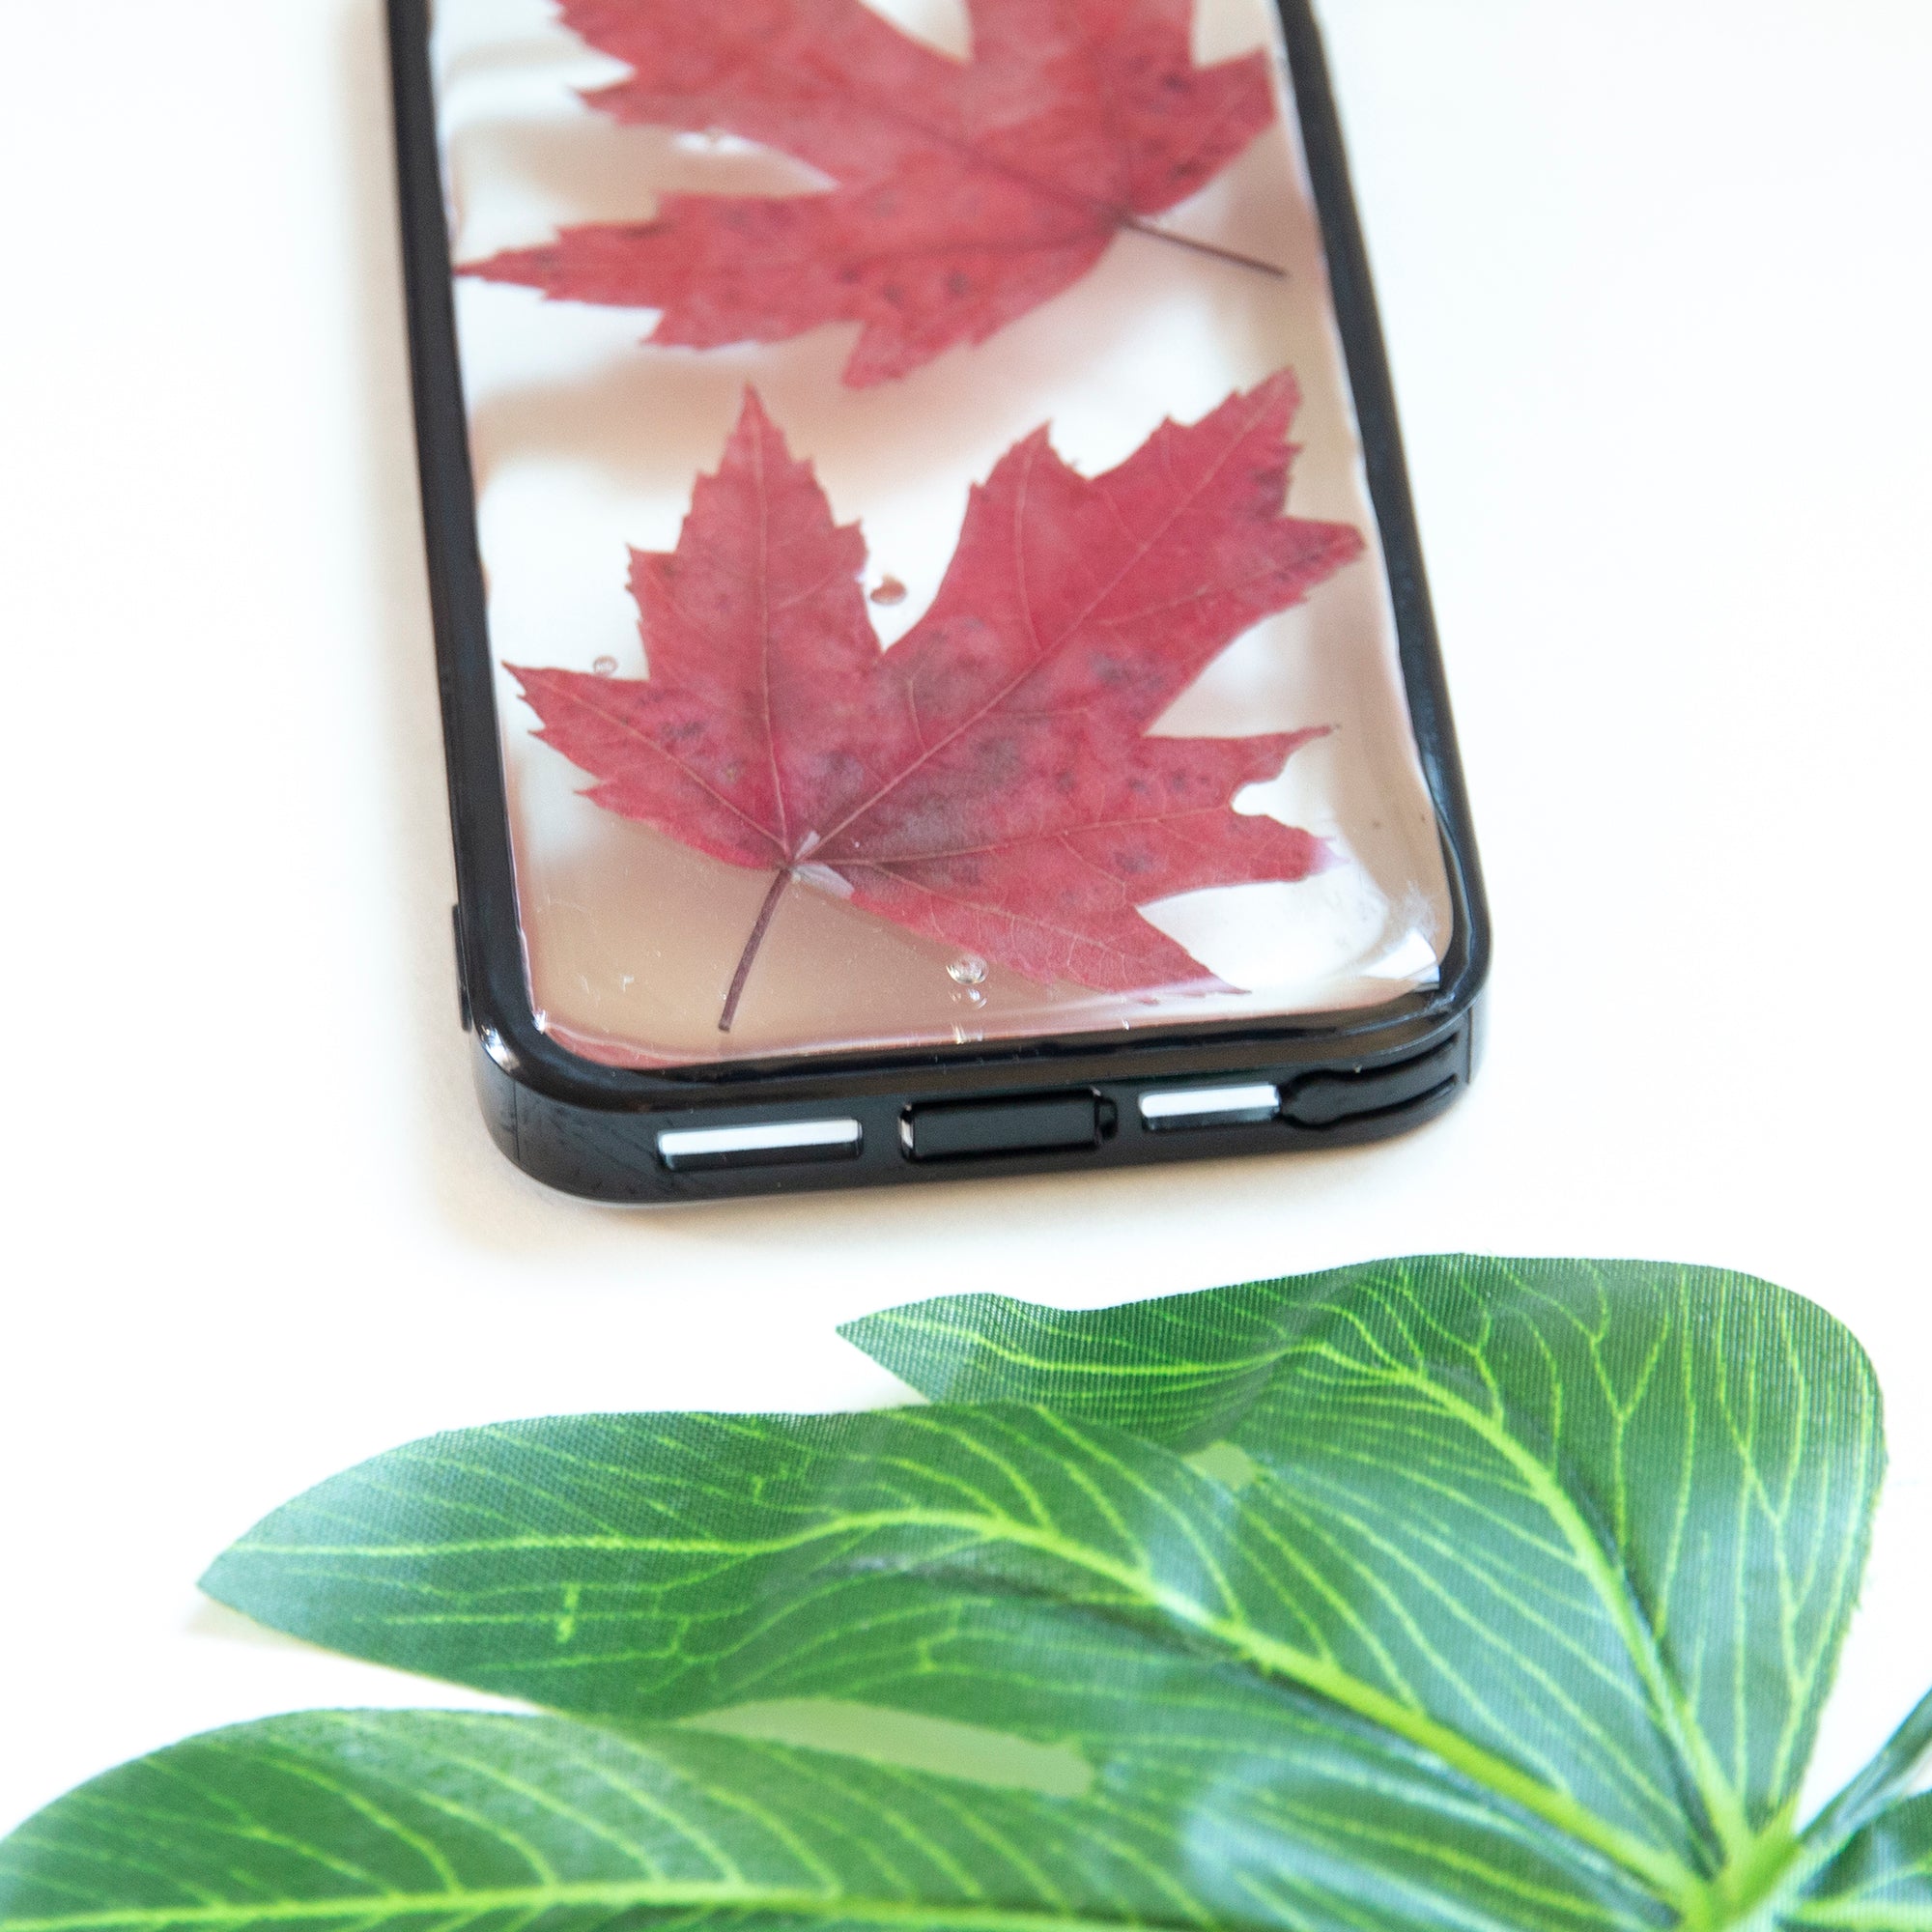 Floral Neverland Floralfy Fall Leaves Real Pressed Red Canadian Maple Leaf Flower Floral Foliage Botanical iPhone 5 5S SE Bumper Case 05